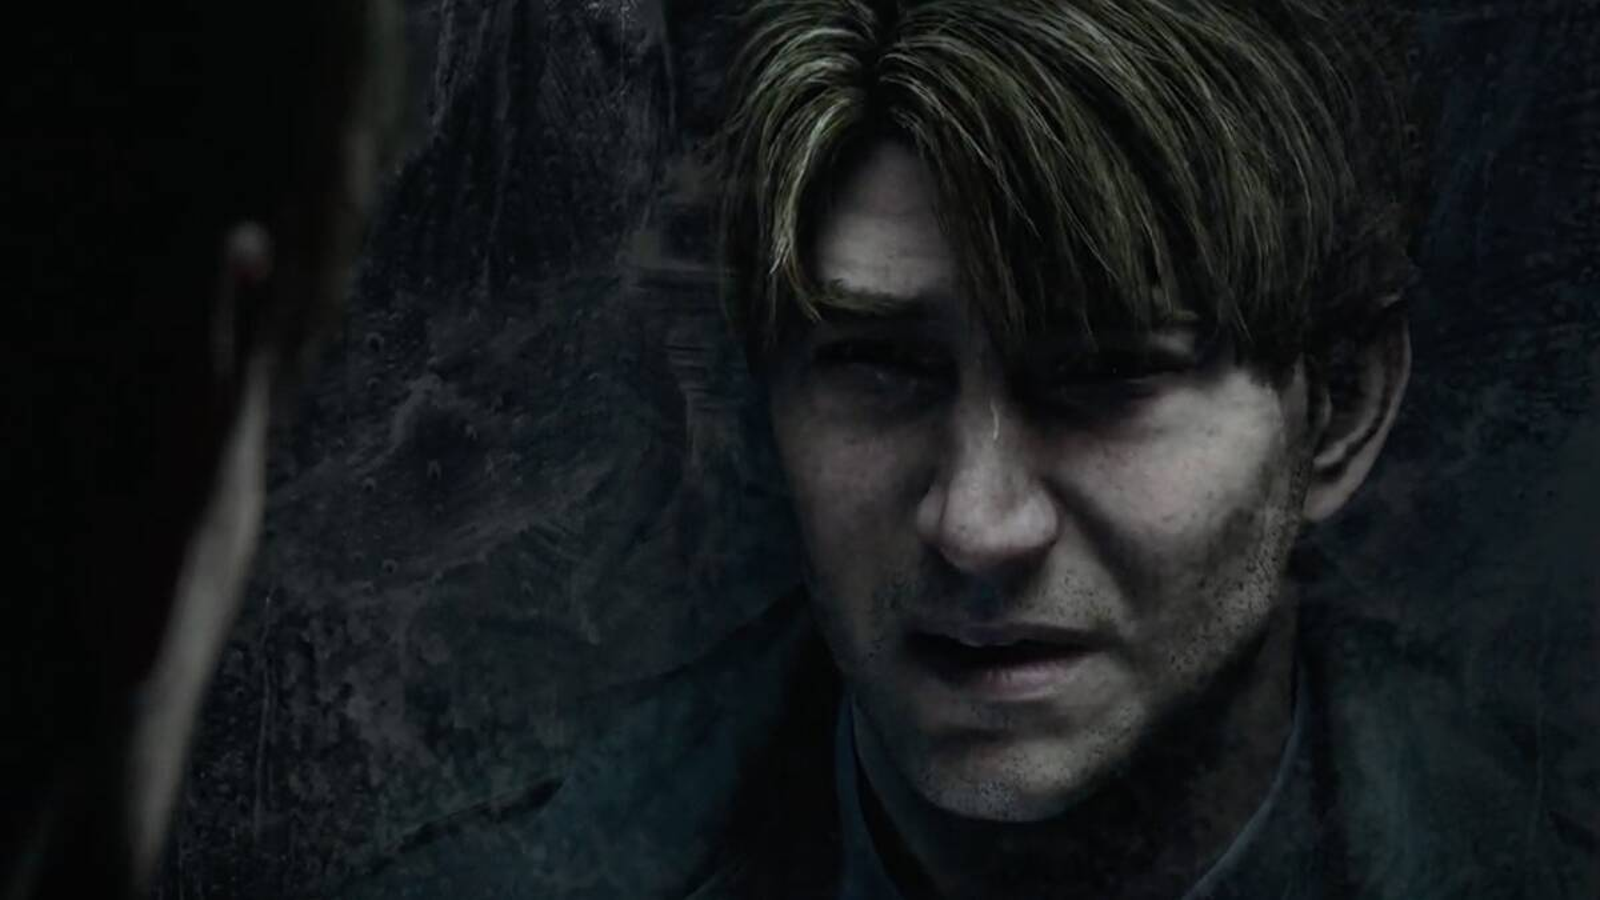 All Silent Hill 2 Remake Rumors and Leaks